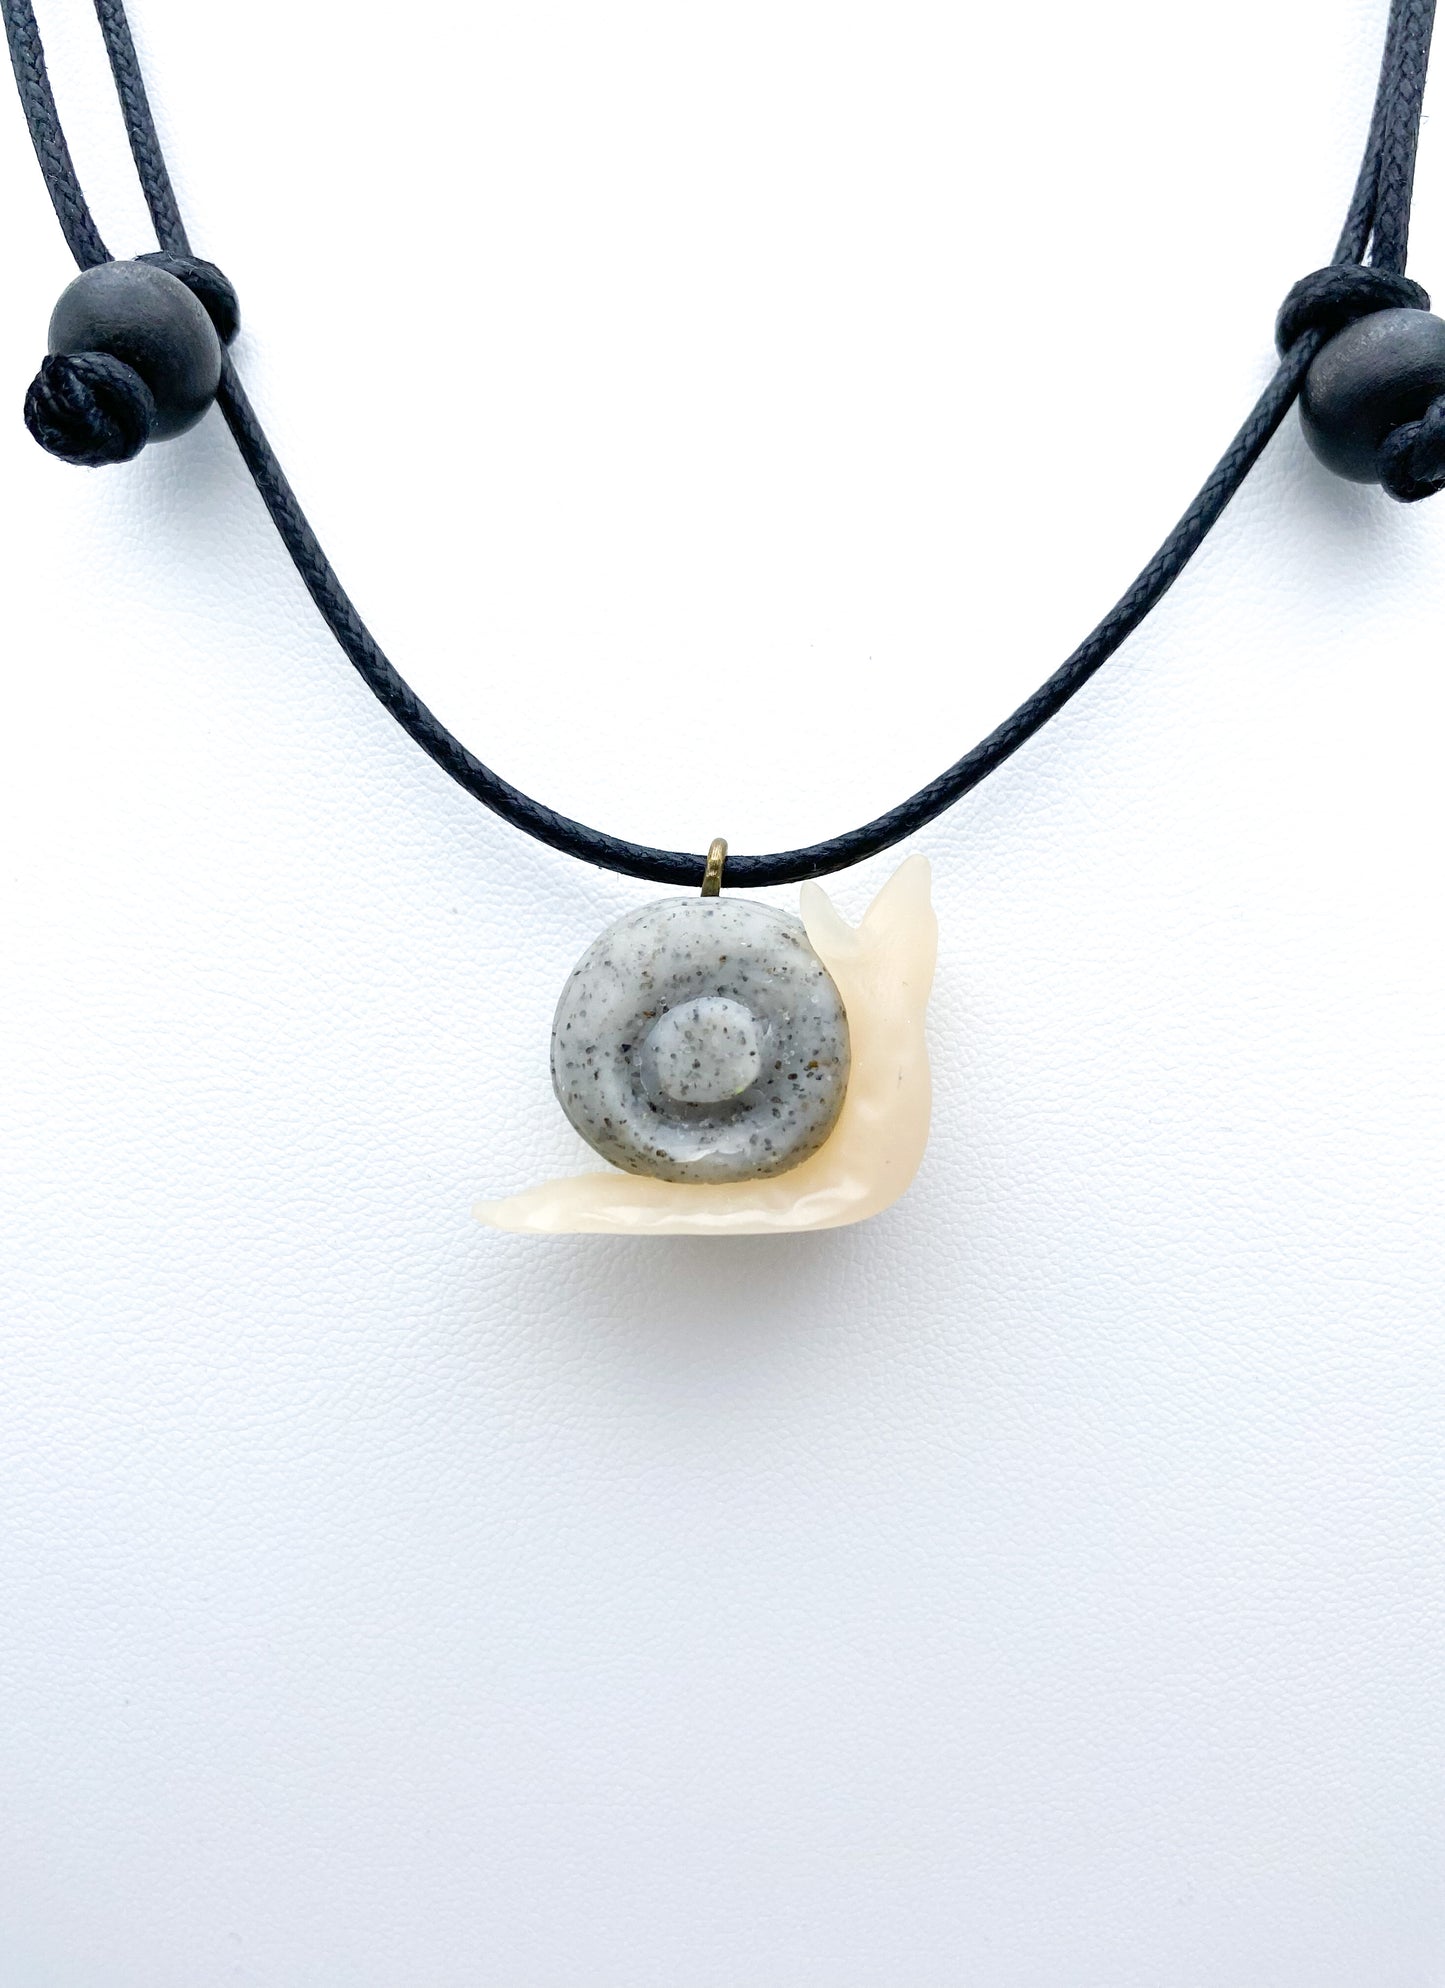 Snail Necklace Granite Carved Shell